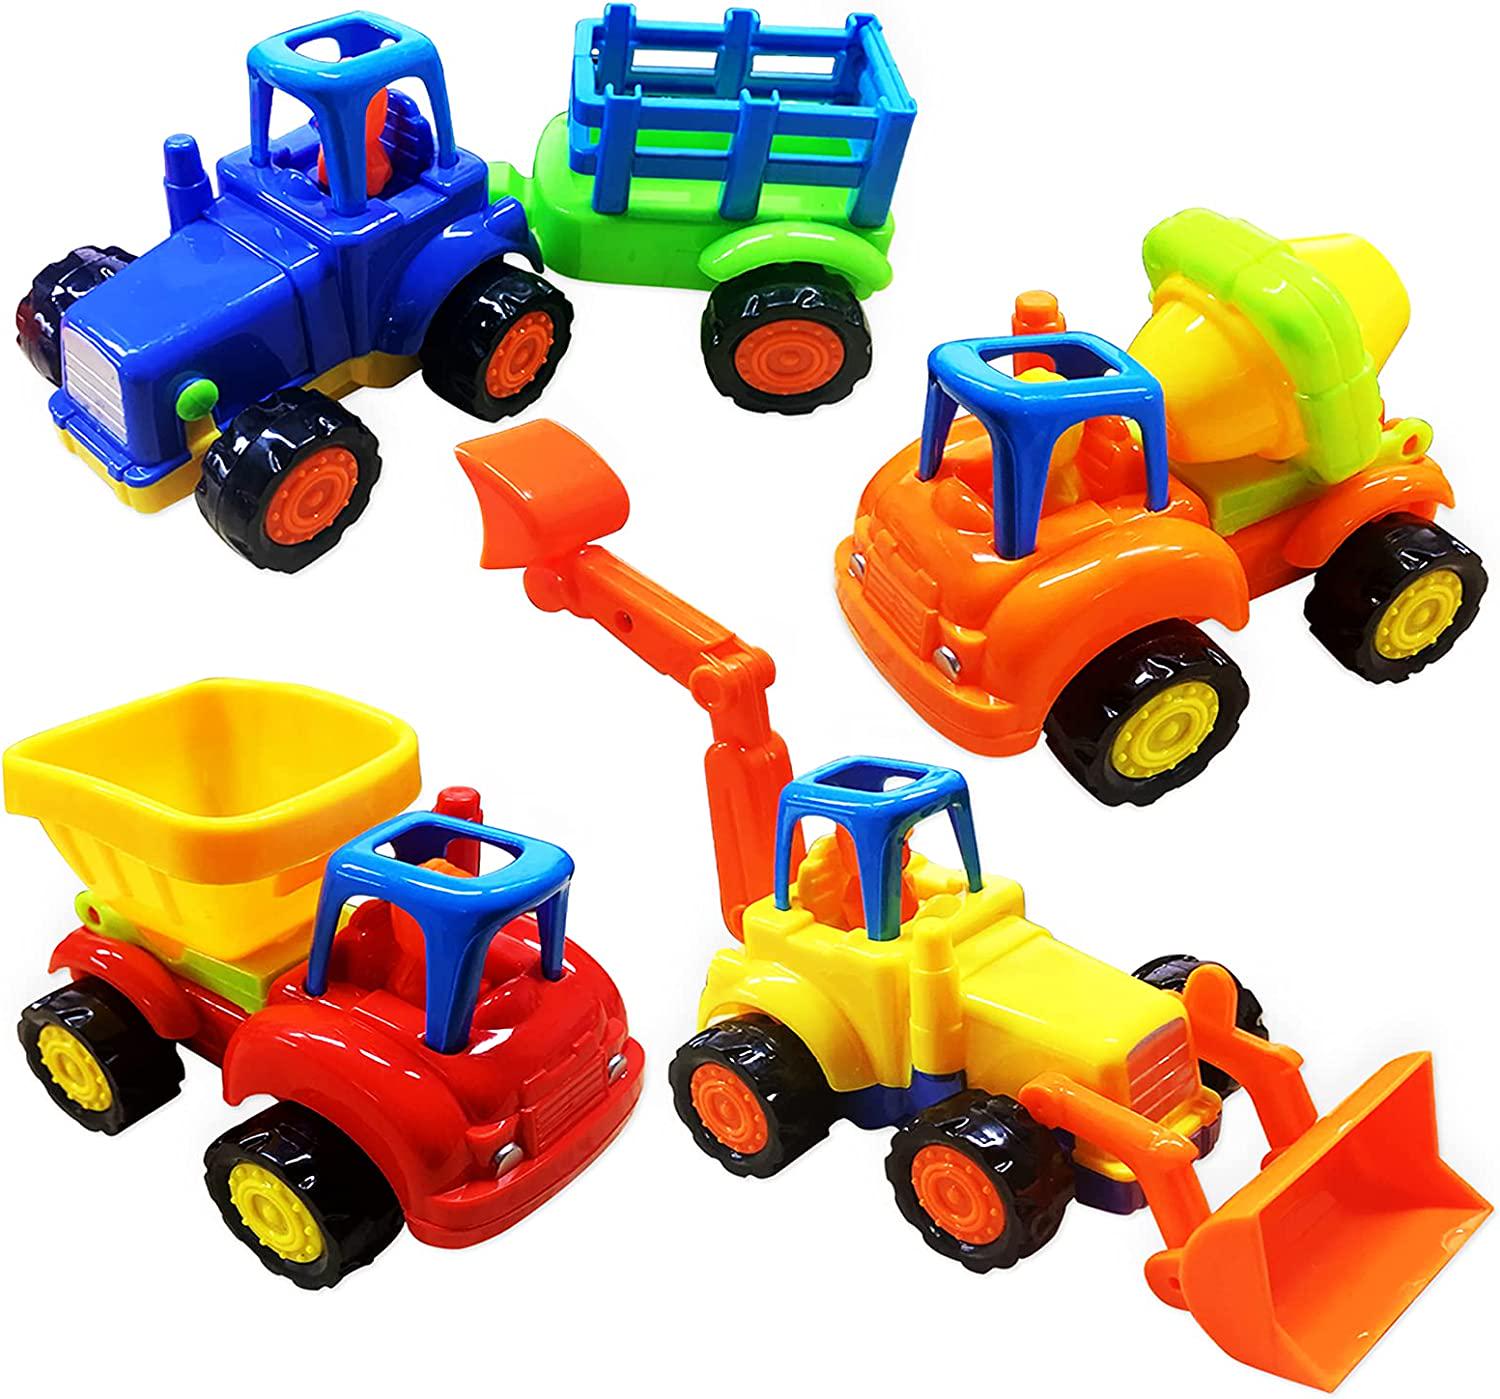 Obaba, Friction Powered Cars Toy Cars for 2,3 Year Push and Go Car Tractor Construction Vehicles Toy 4 Set Tractor, Bulldozer, Cement Mixer Truck, Dumper Early Education for Toddler Boy